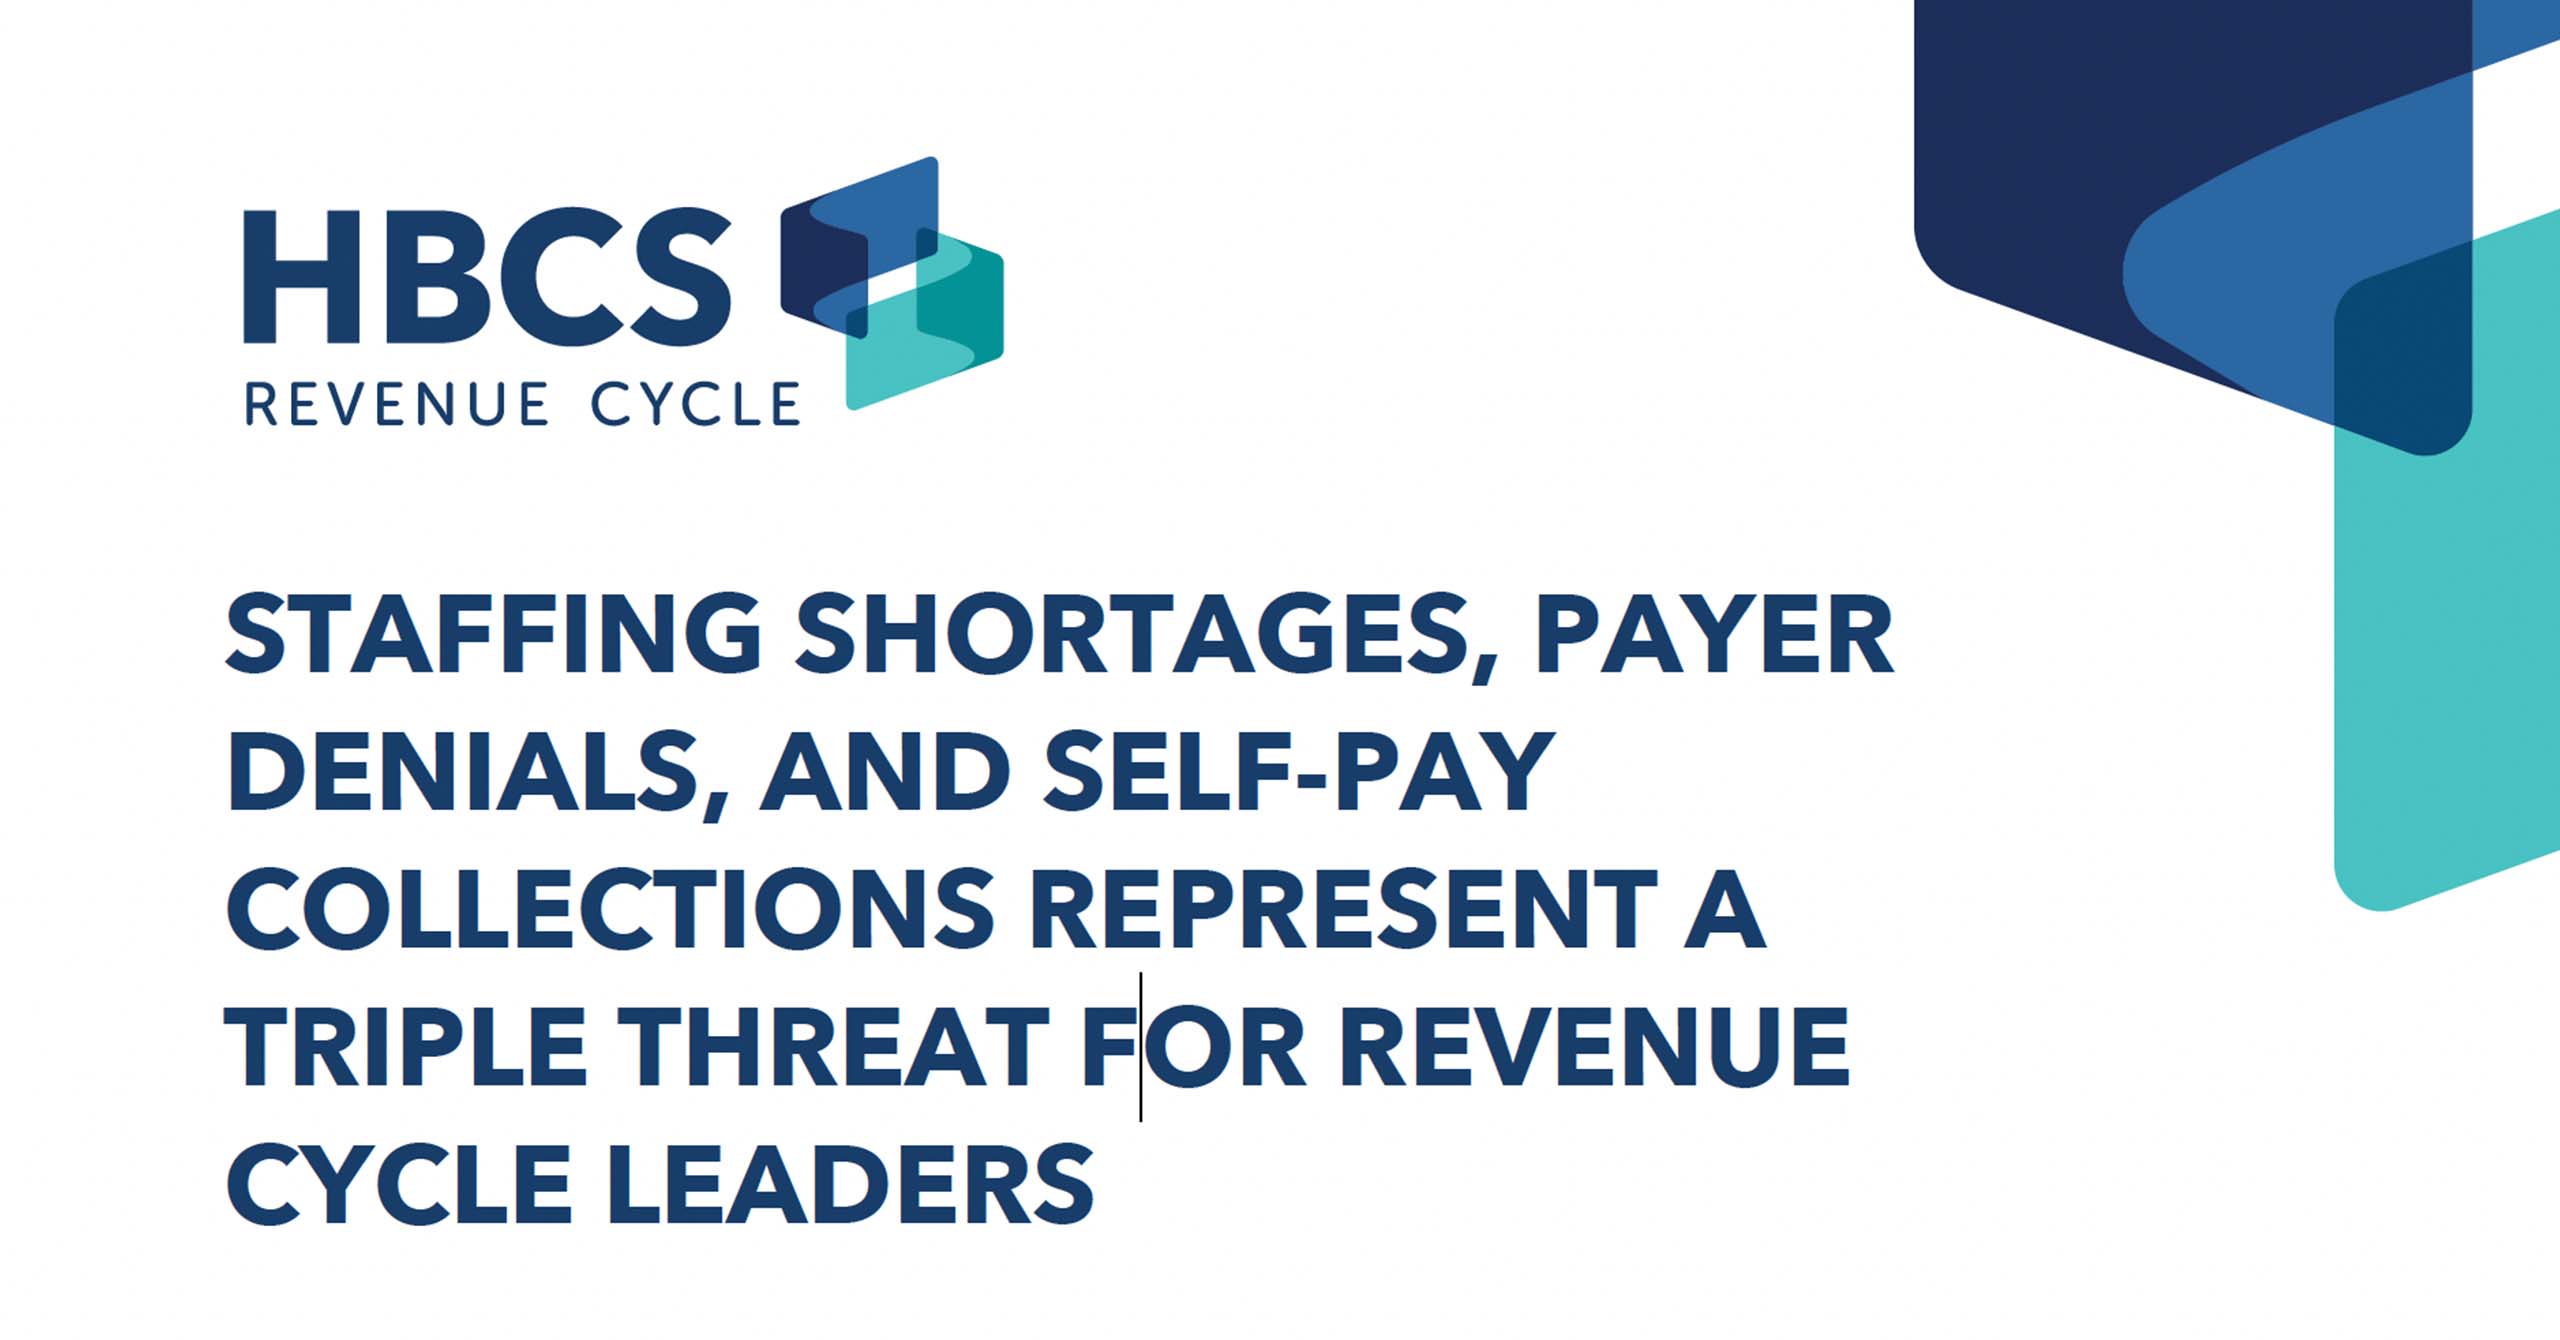 Staffing Shortages, Payer Denials, and Self-Pay Collections Represent a Triple Threat for Revenue Cycle Leaders